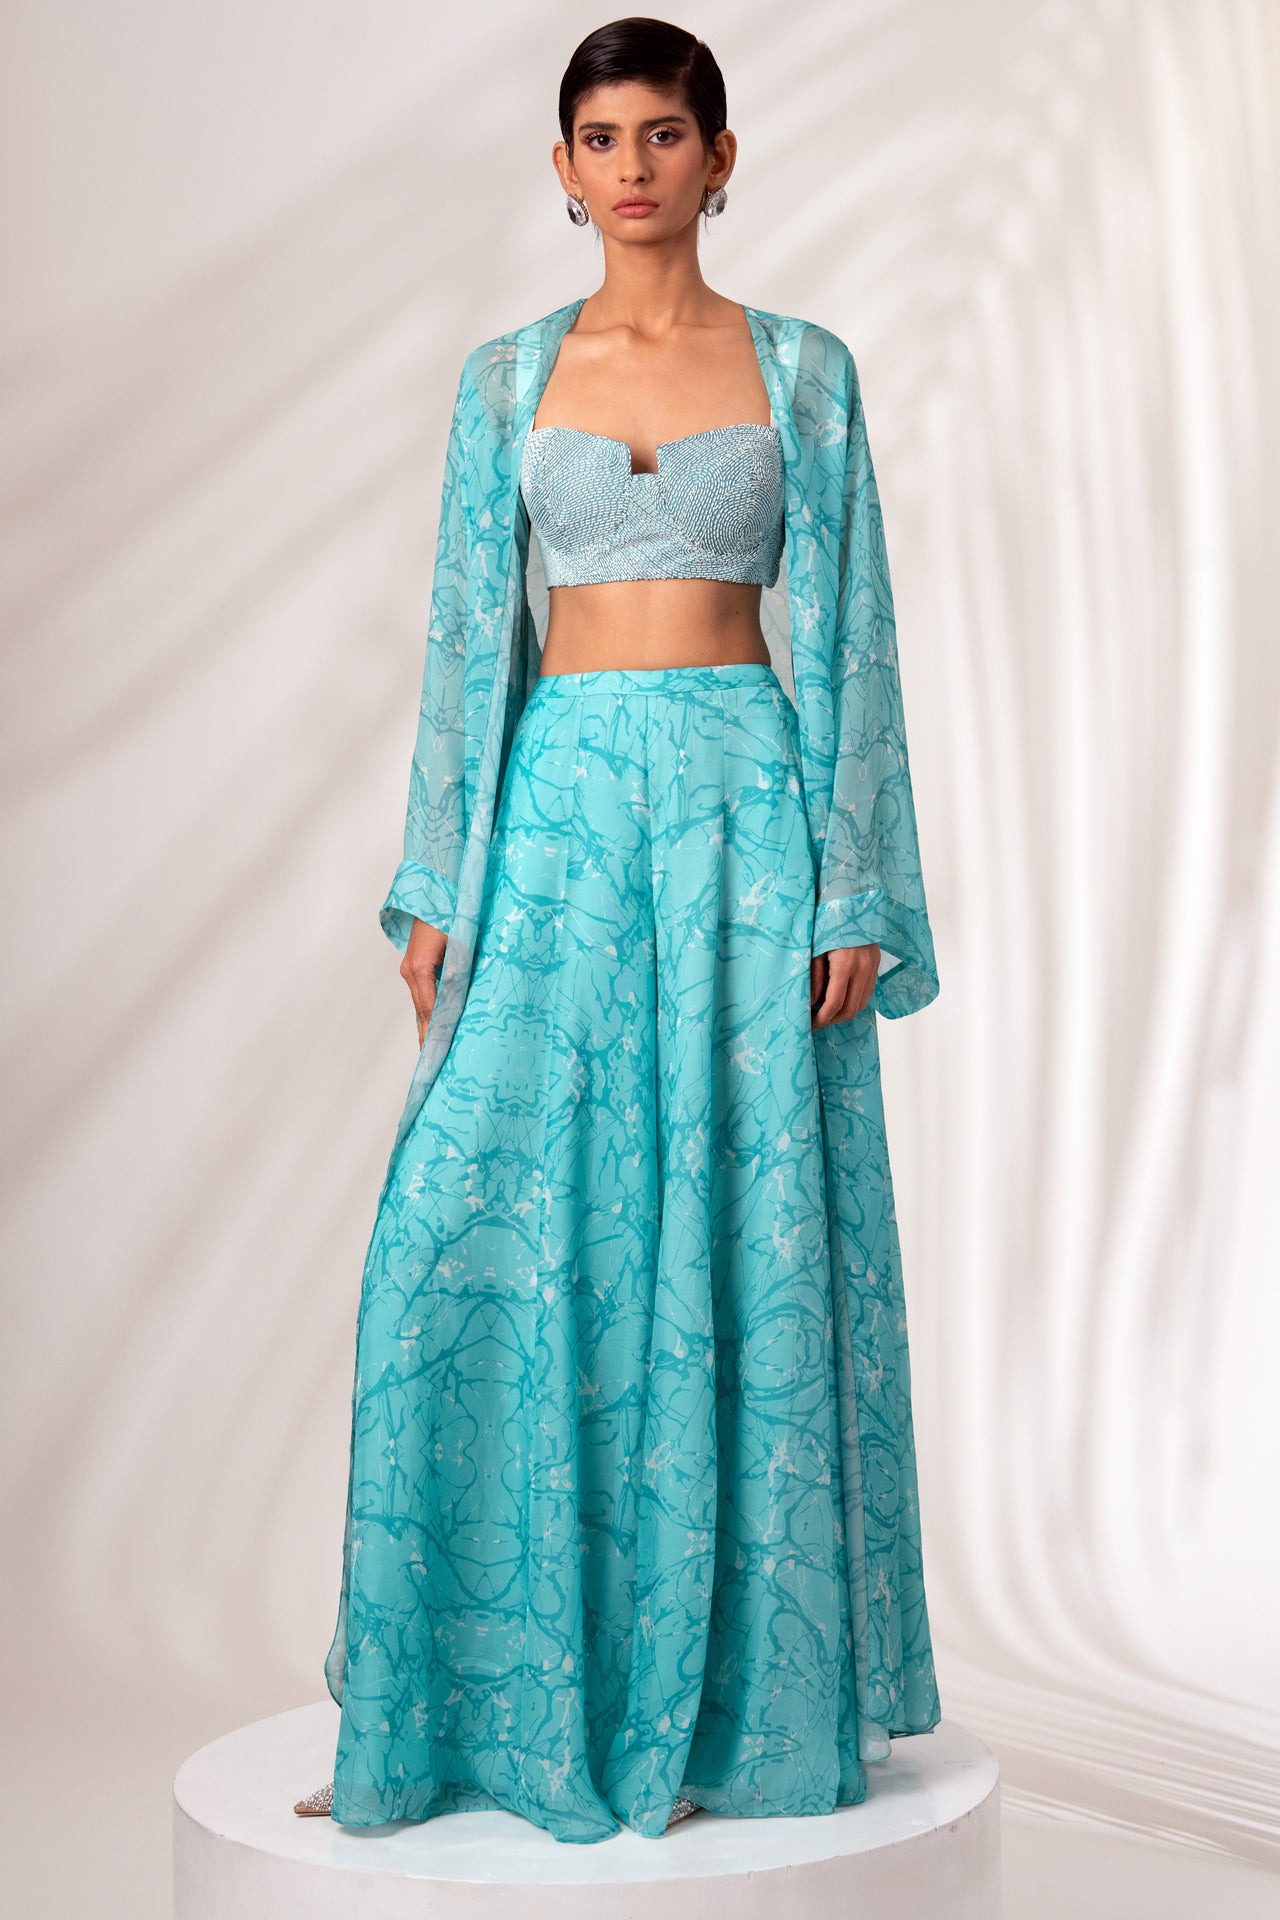 Zuri - Sea Green Overlay with Divided Skirt and Bustier